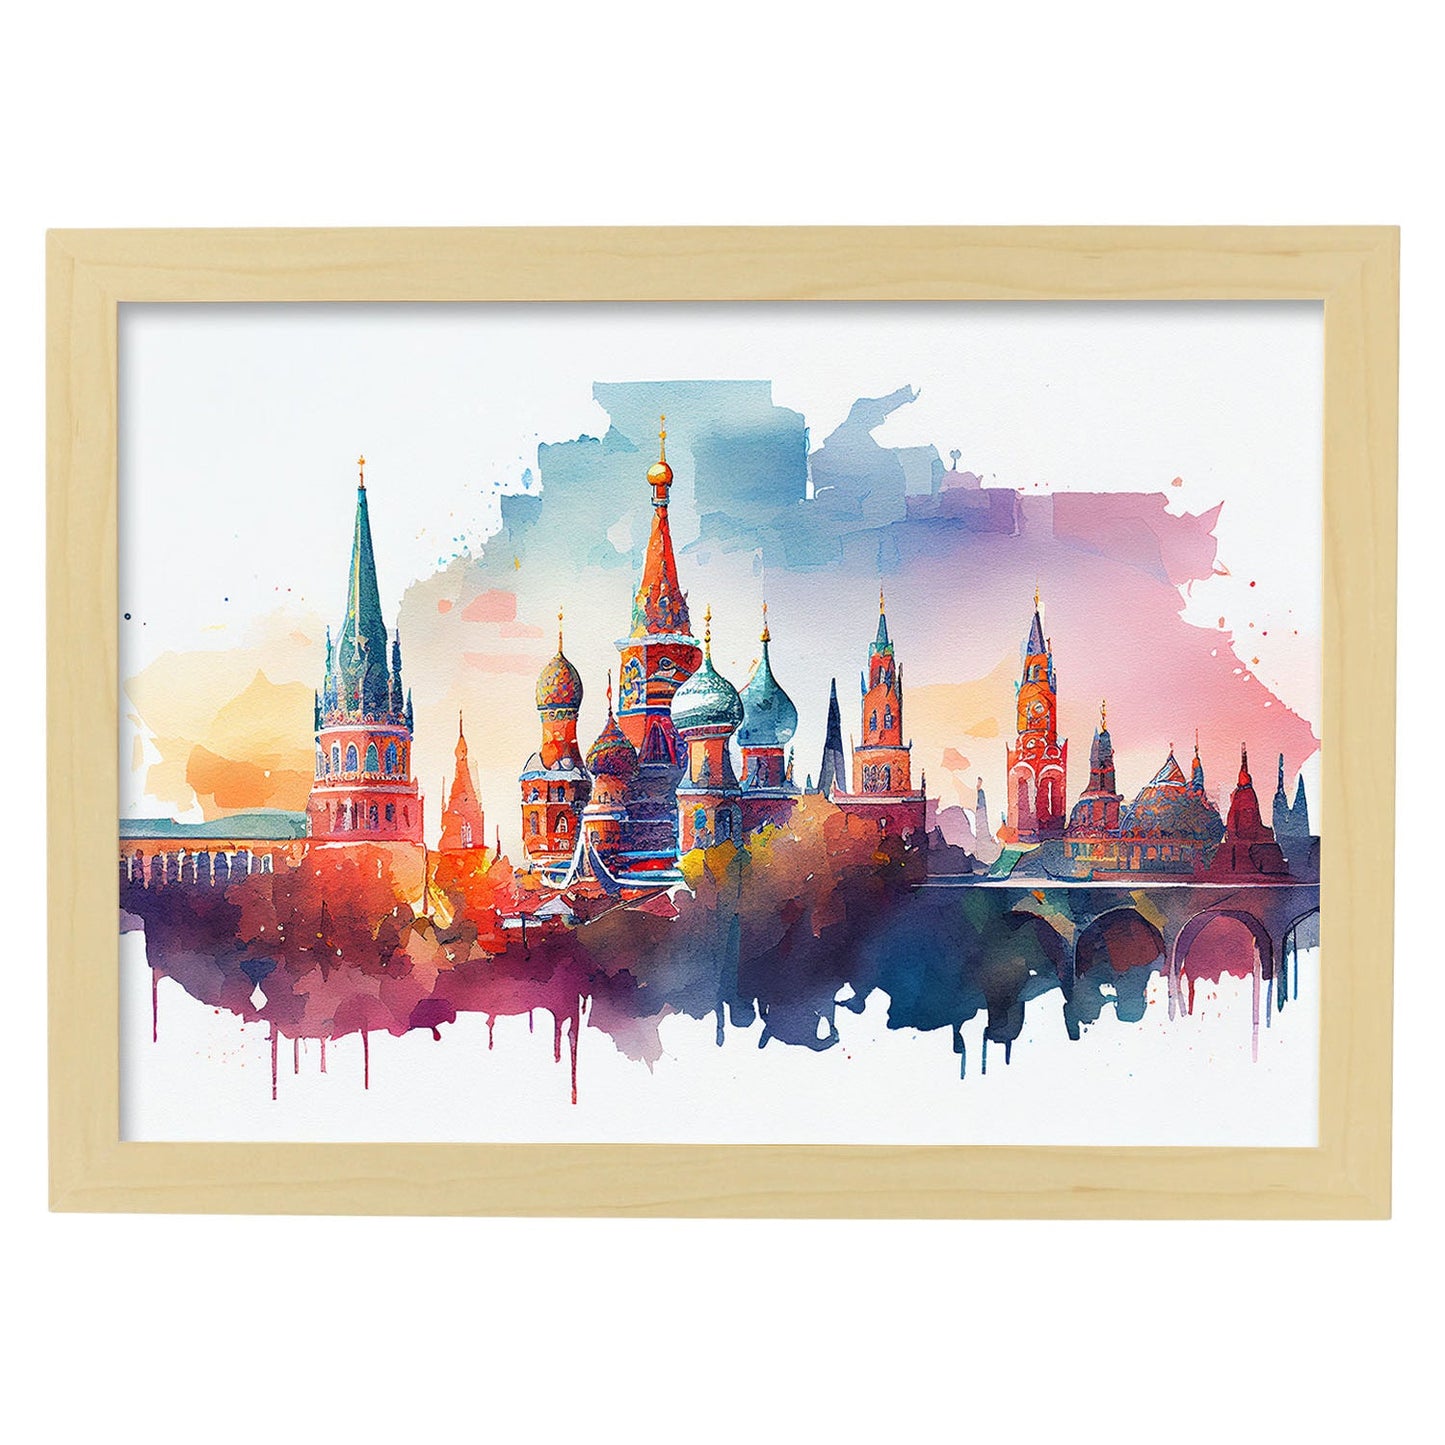 Nacnic watercolor of a skyline of the city of Moscow. Aesthetic Wall Art Prints for Bedroom or Living Room Design.-Artwork-Nacnic-A4-Marco Madera Clara-Nacnic Estudio SL